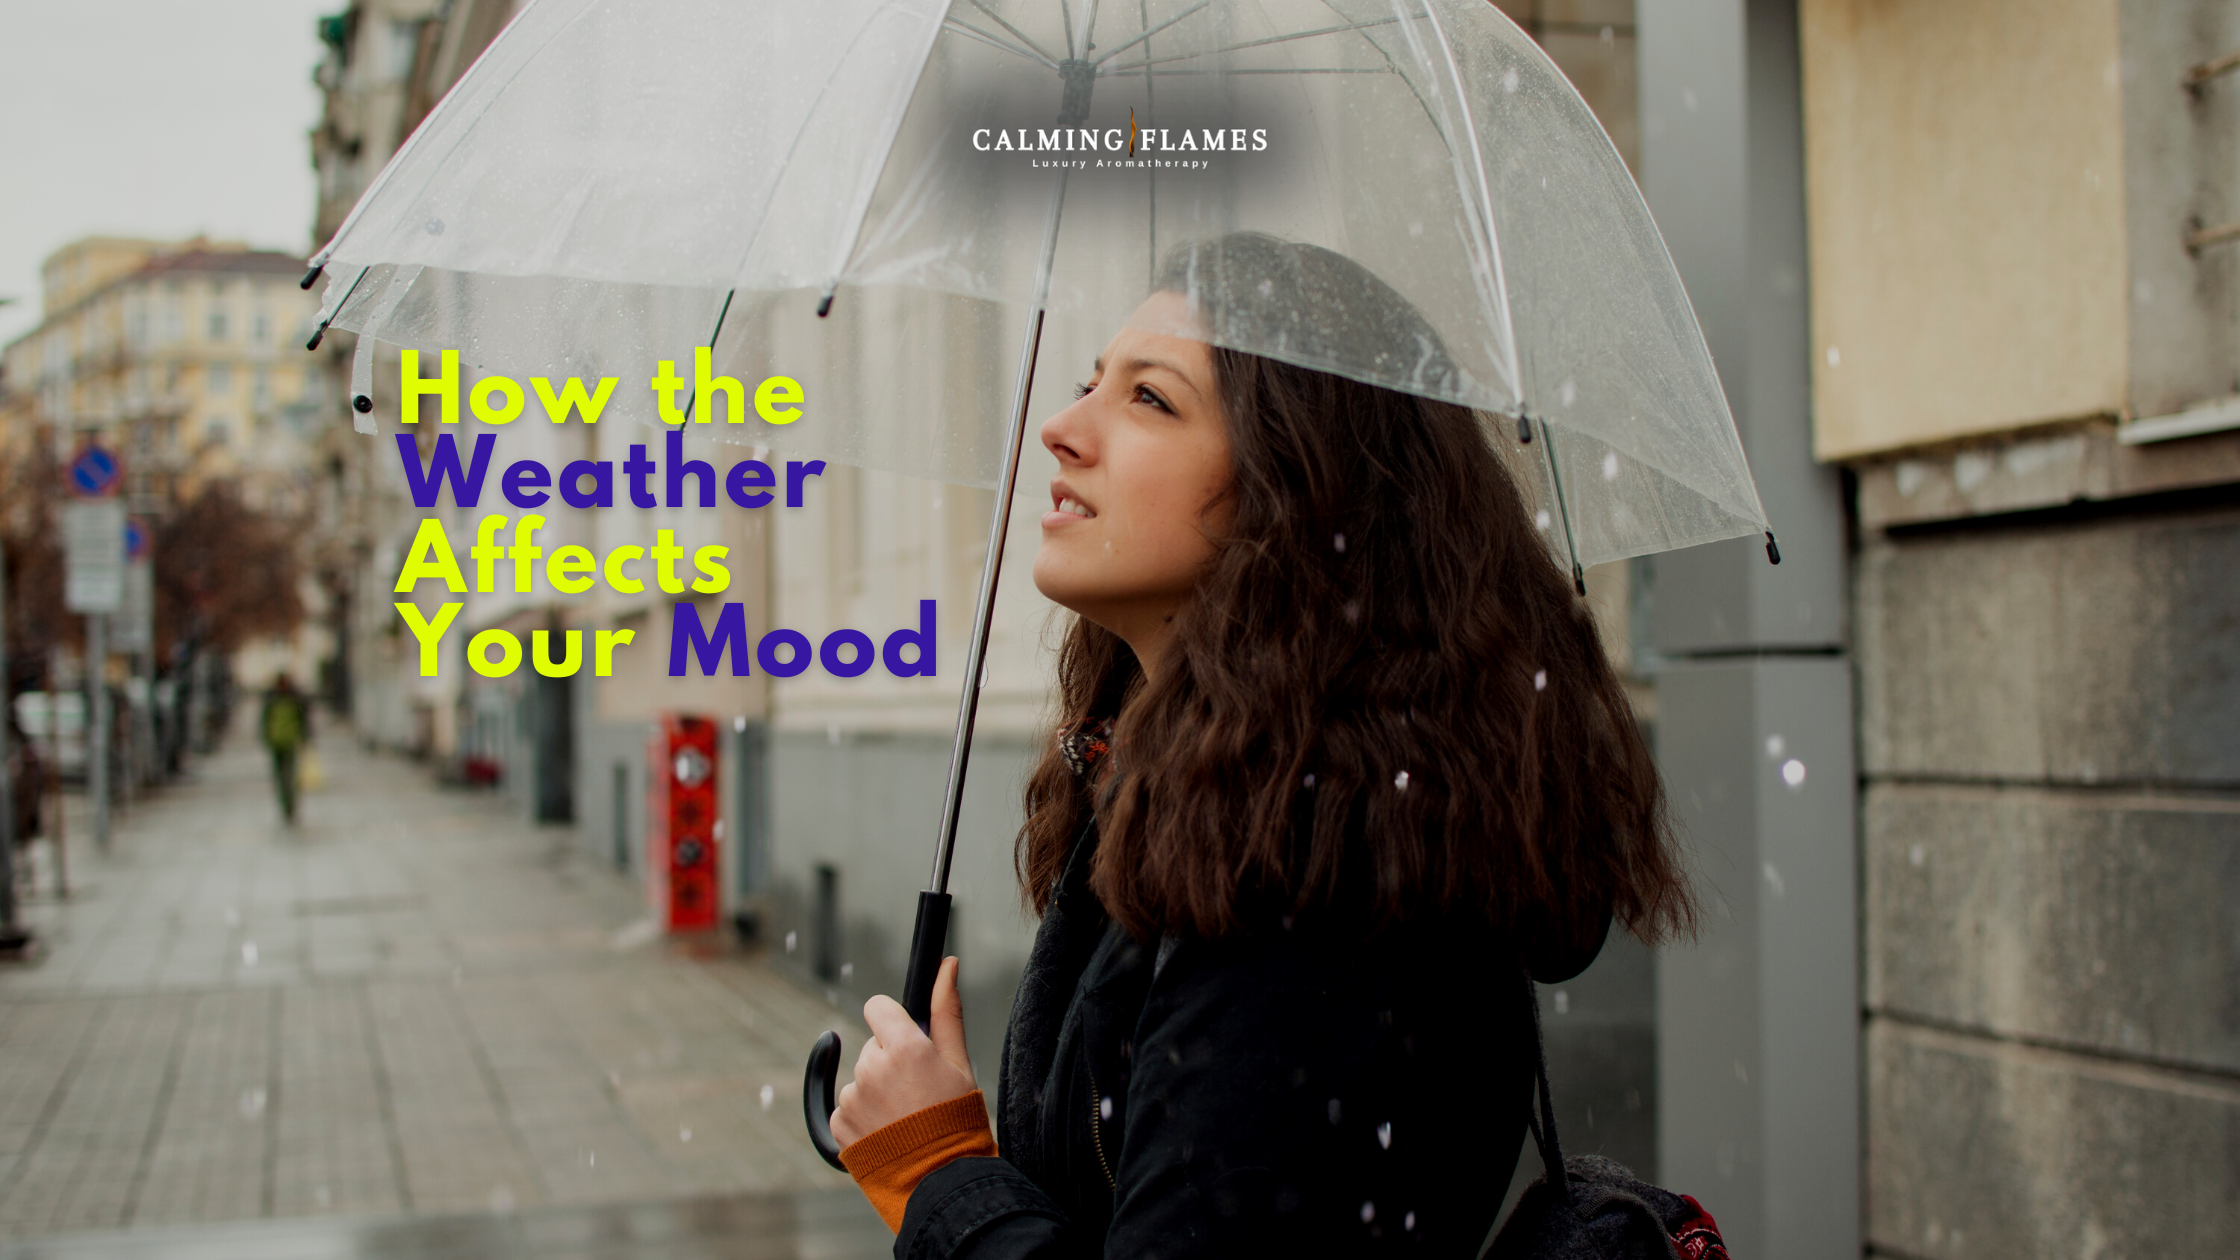 How the Weather Affects Your Mood